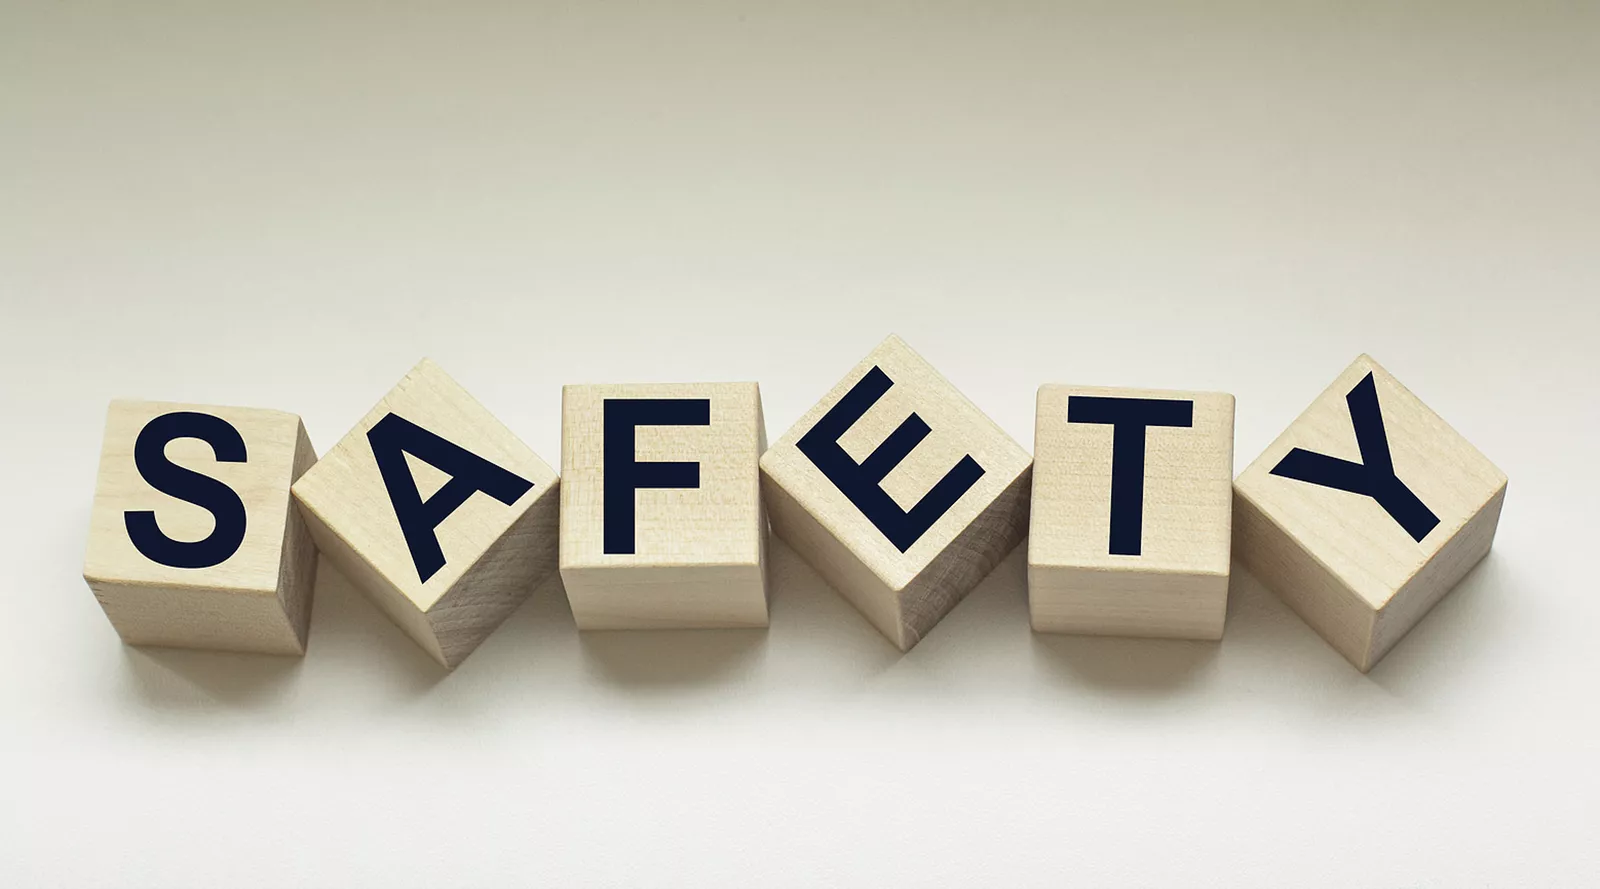 11 Simple Health and Safety Campaigns Ideas to Improve Workplace Safety -  Kee Safety